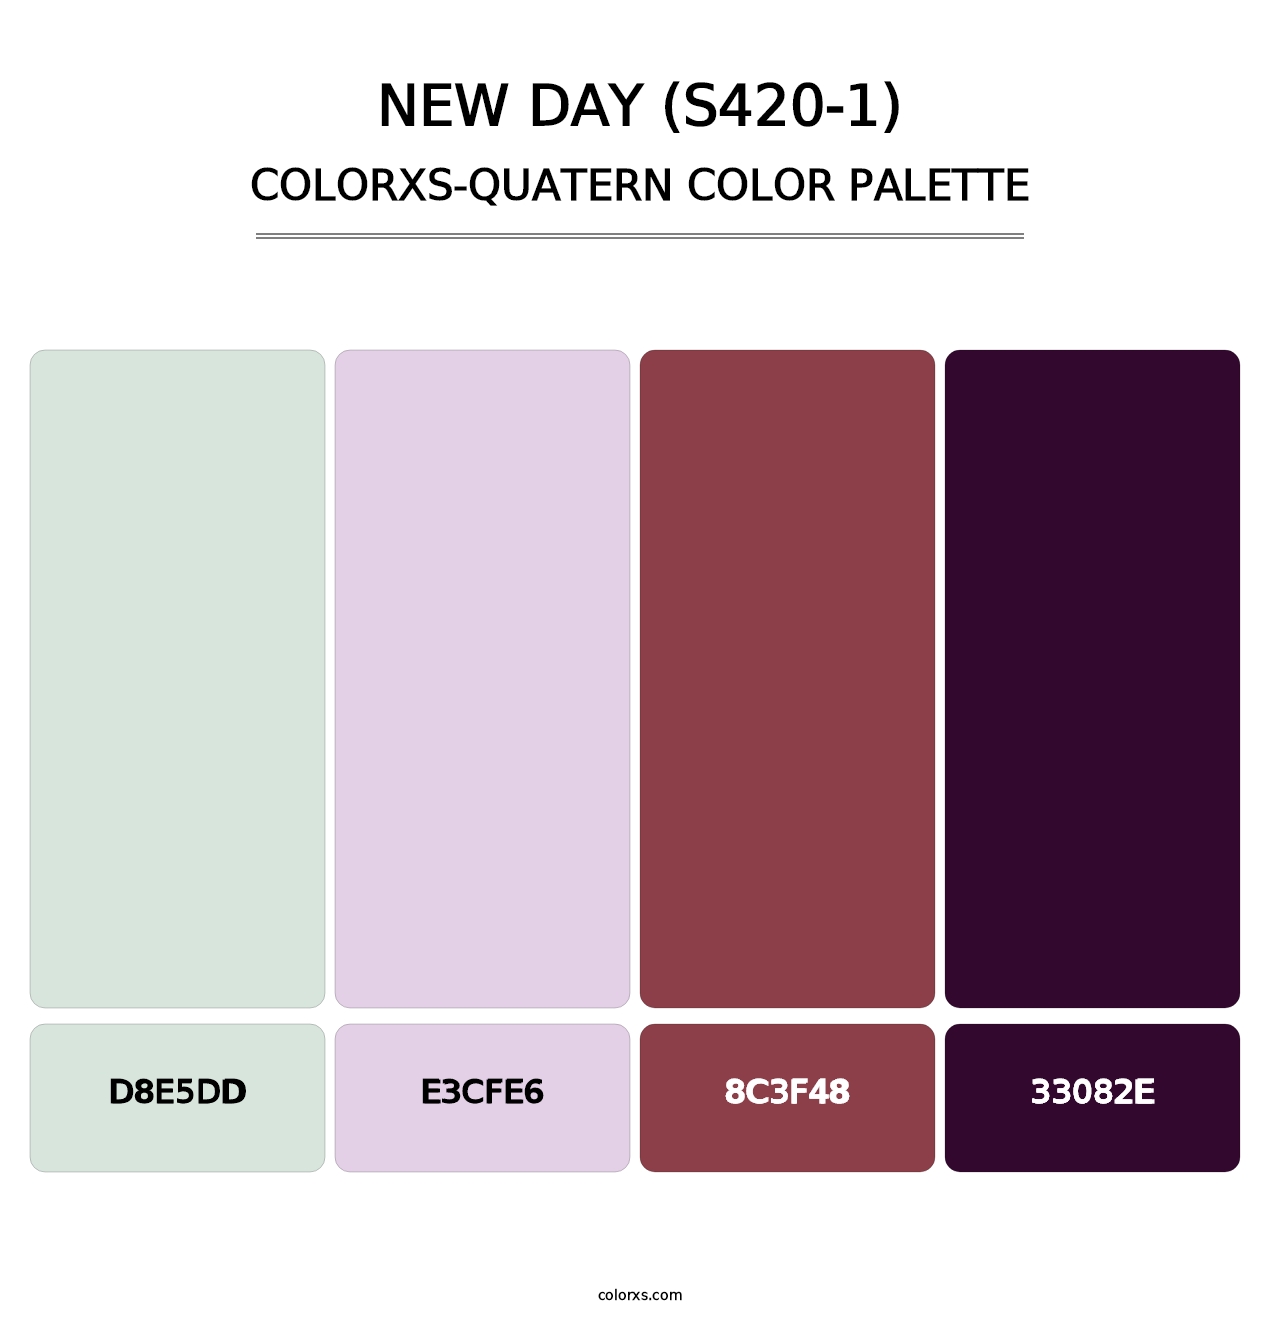 New Day (S420-1) - Colorxs Quatern Palette